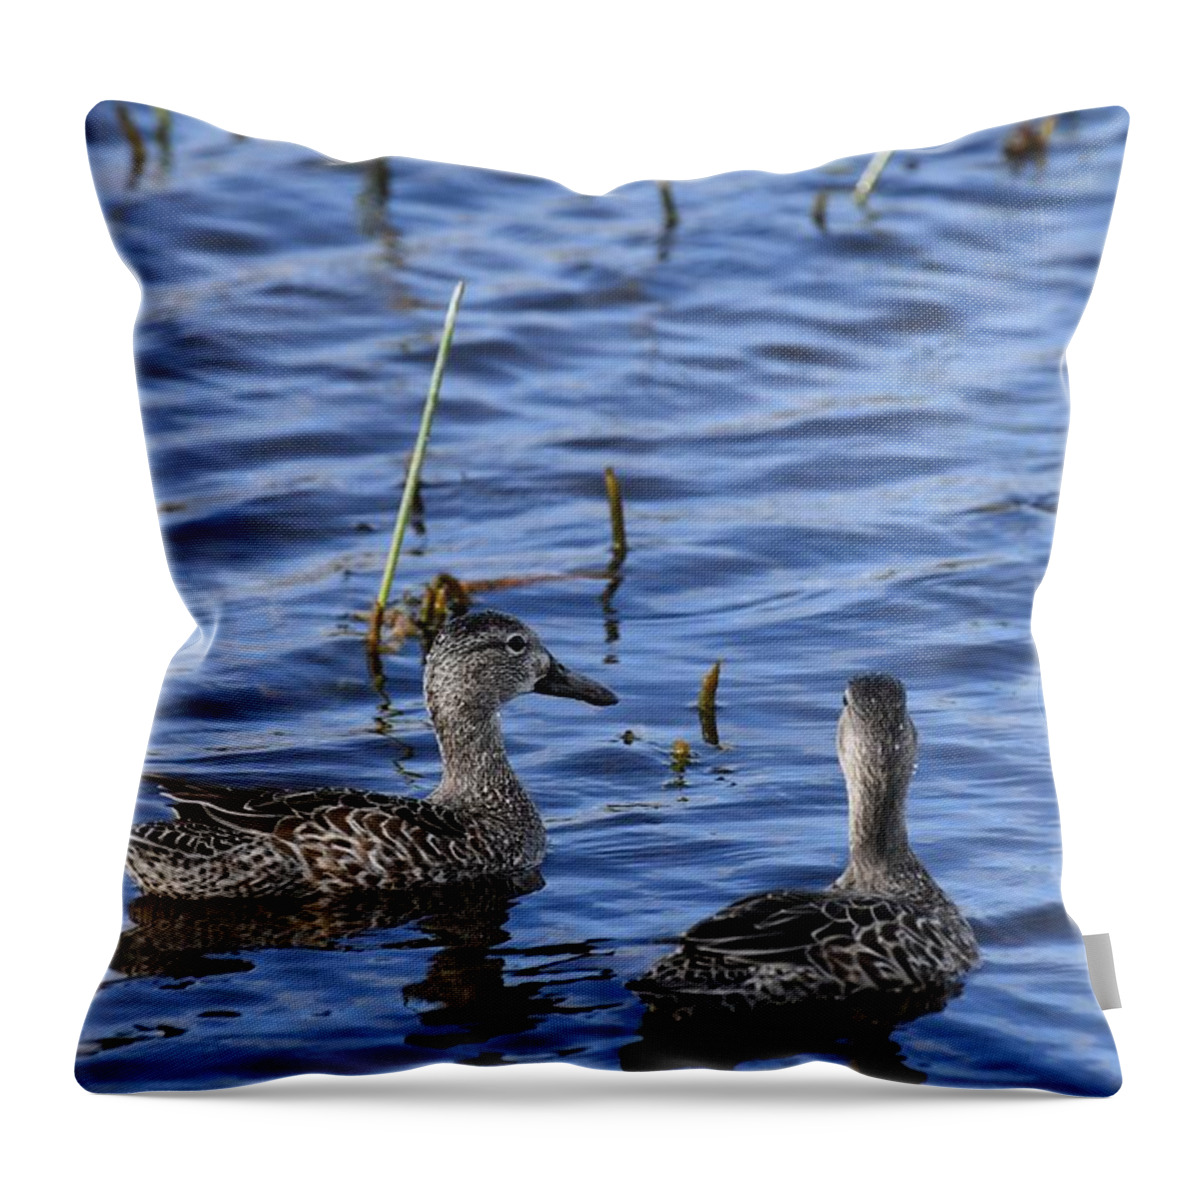 Teal Throw Pillow featuring the photograph Blue-winged Teal by David Campione